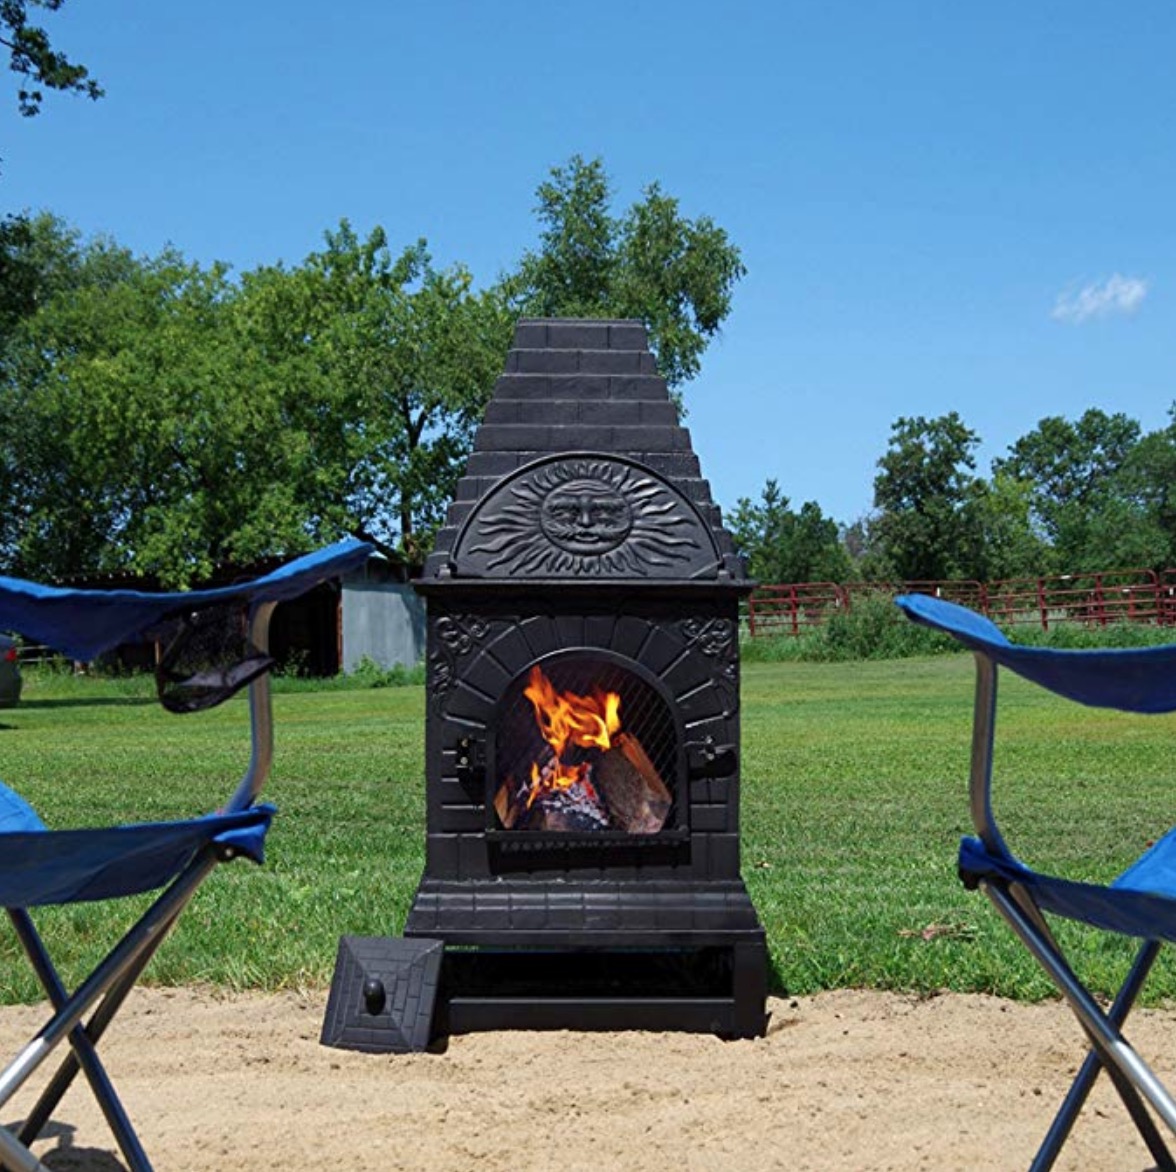 Our Review of the 5 Best Cast Iron Chimineas